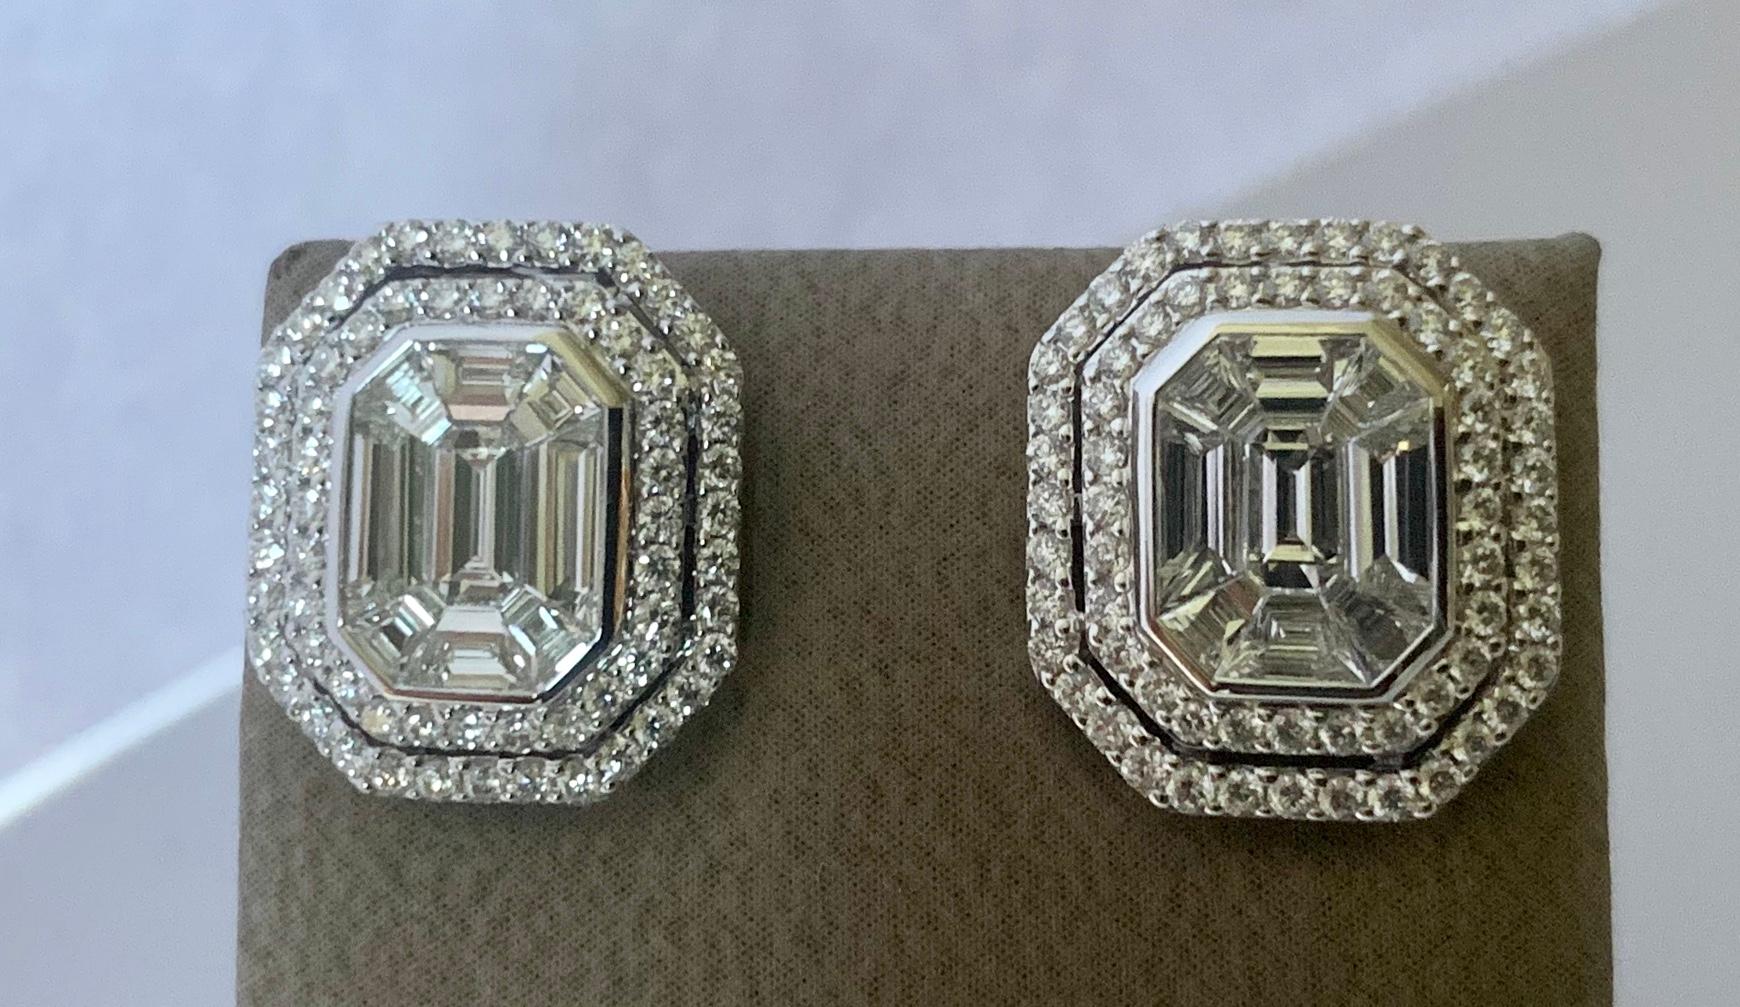  A pair of modern emerald cut illusion diamond cluster earrings crafted in 18 K white gold. The centre  is composed of  a mosaic of 18 Diamond baguettes with a total weight of 1.35 ct, G color, vs clarity to give the illusion of being on single